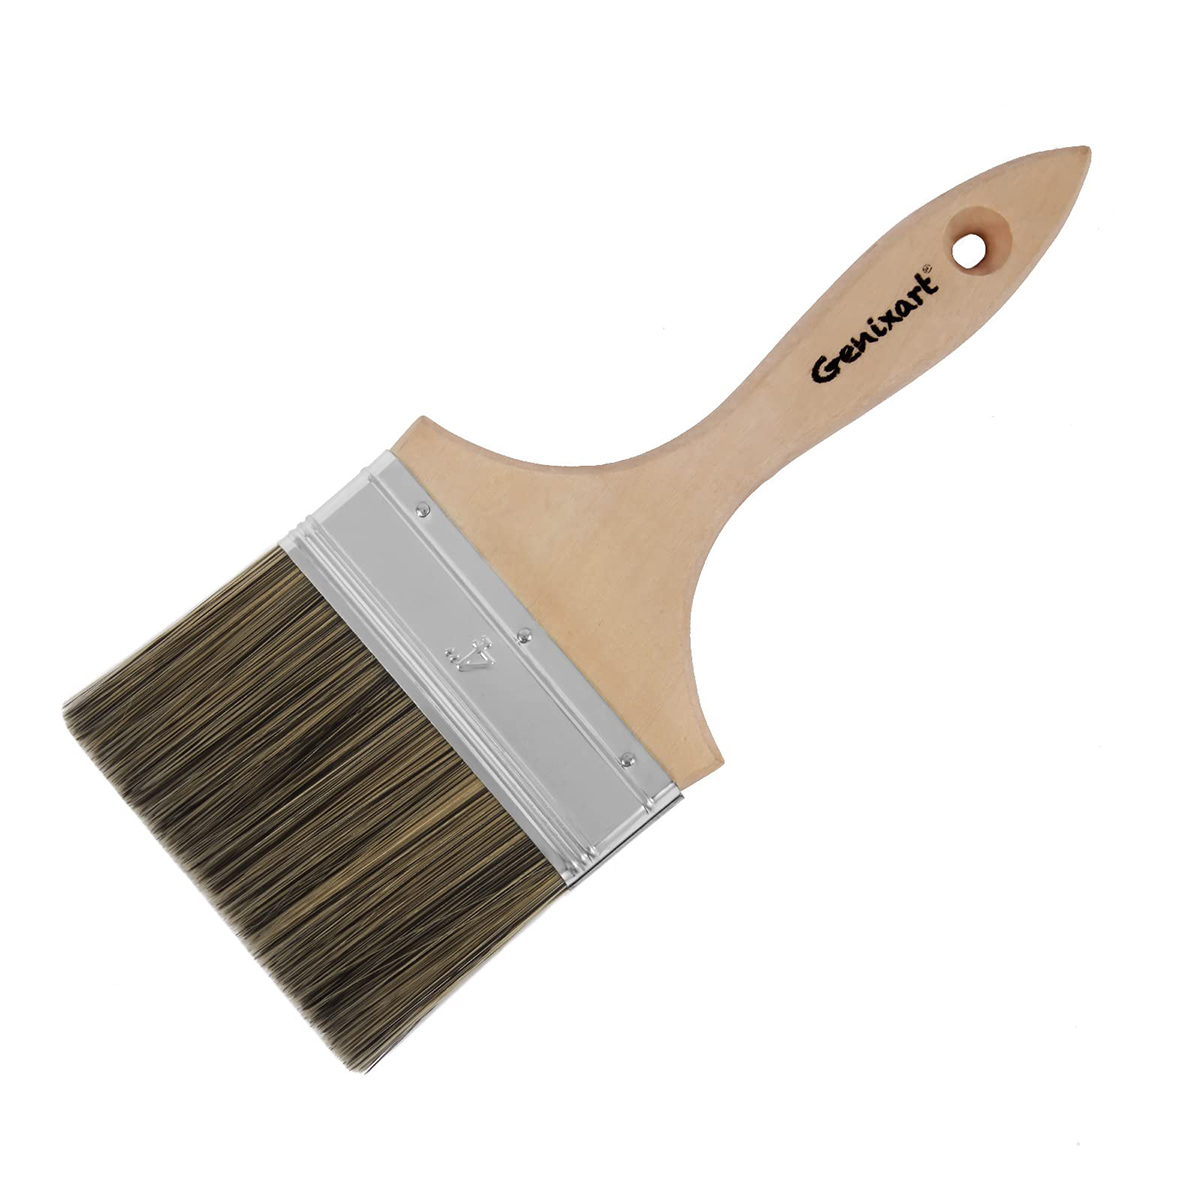 What Are Chip Paint Brushes